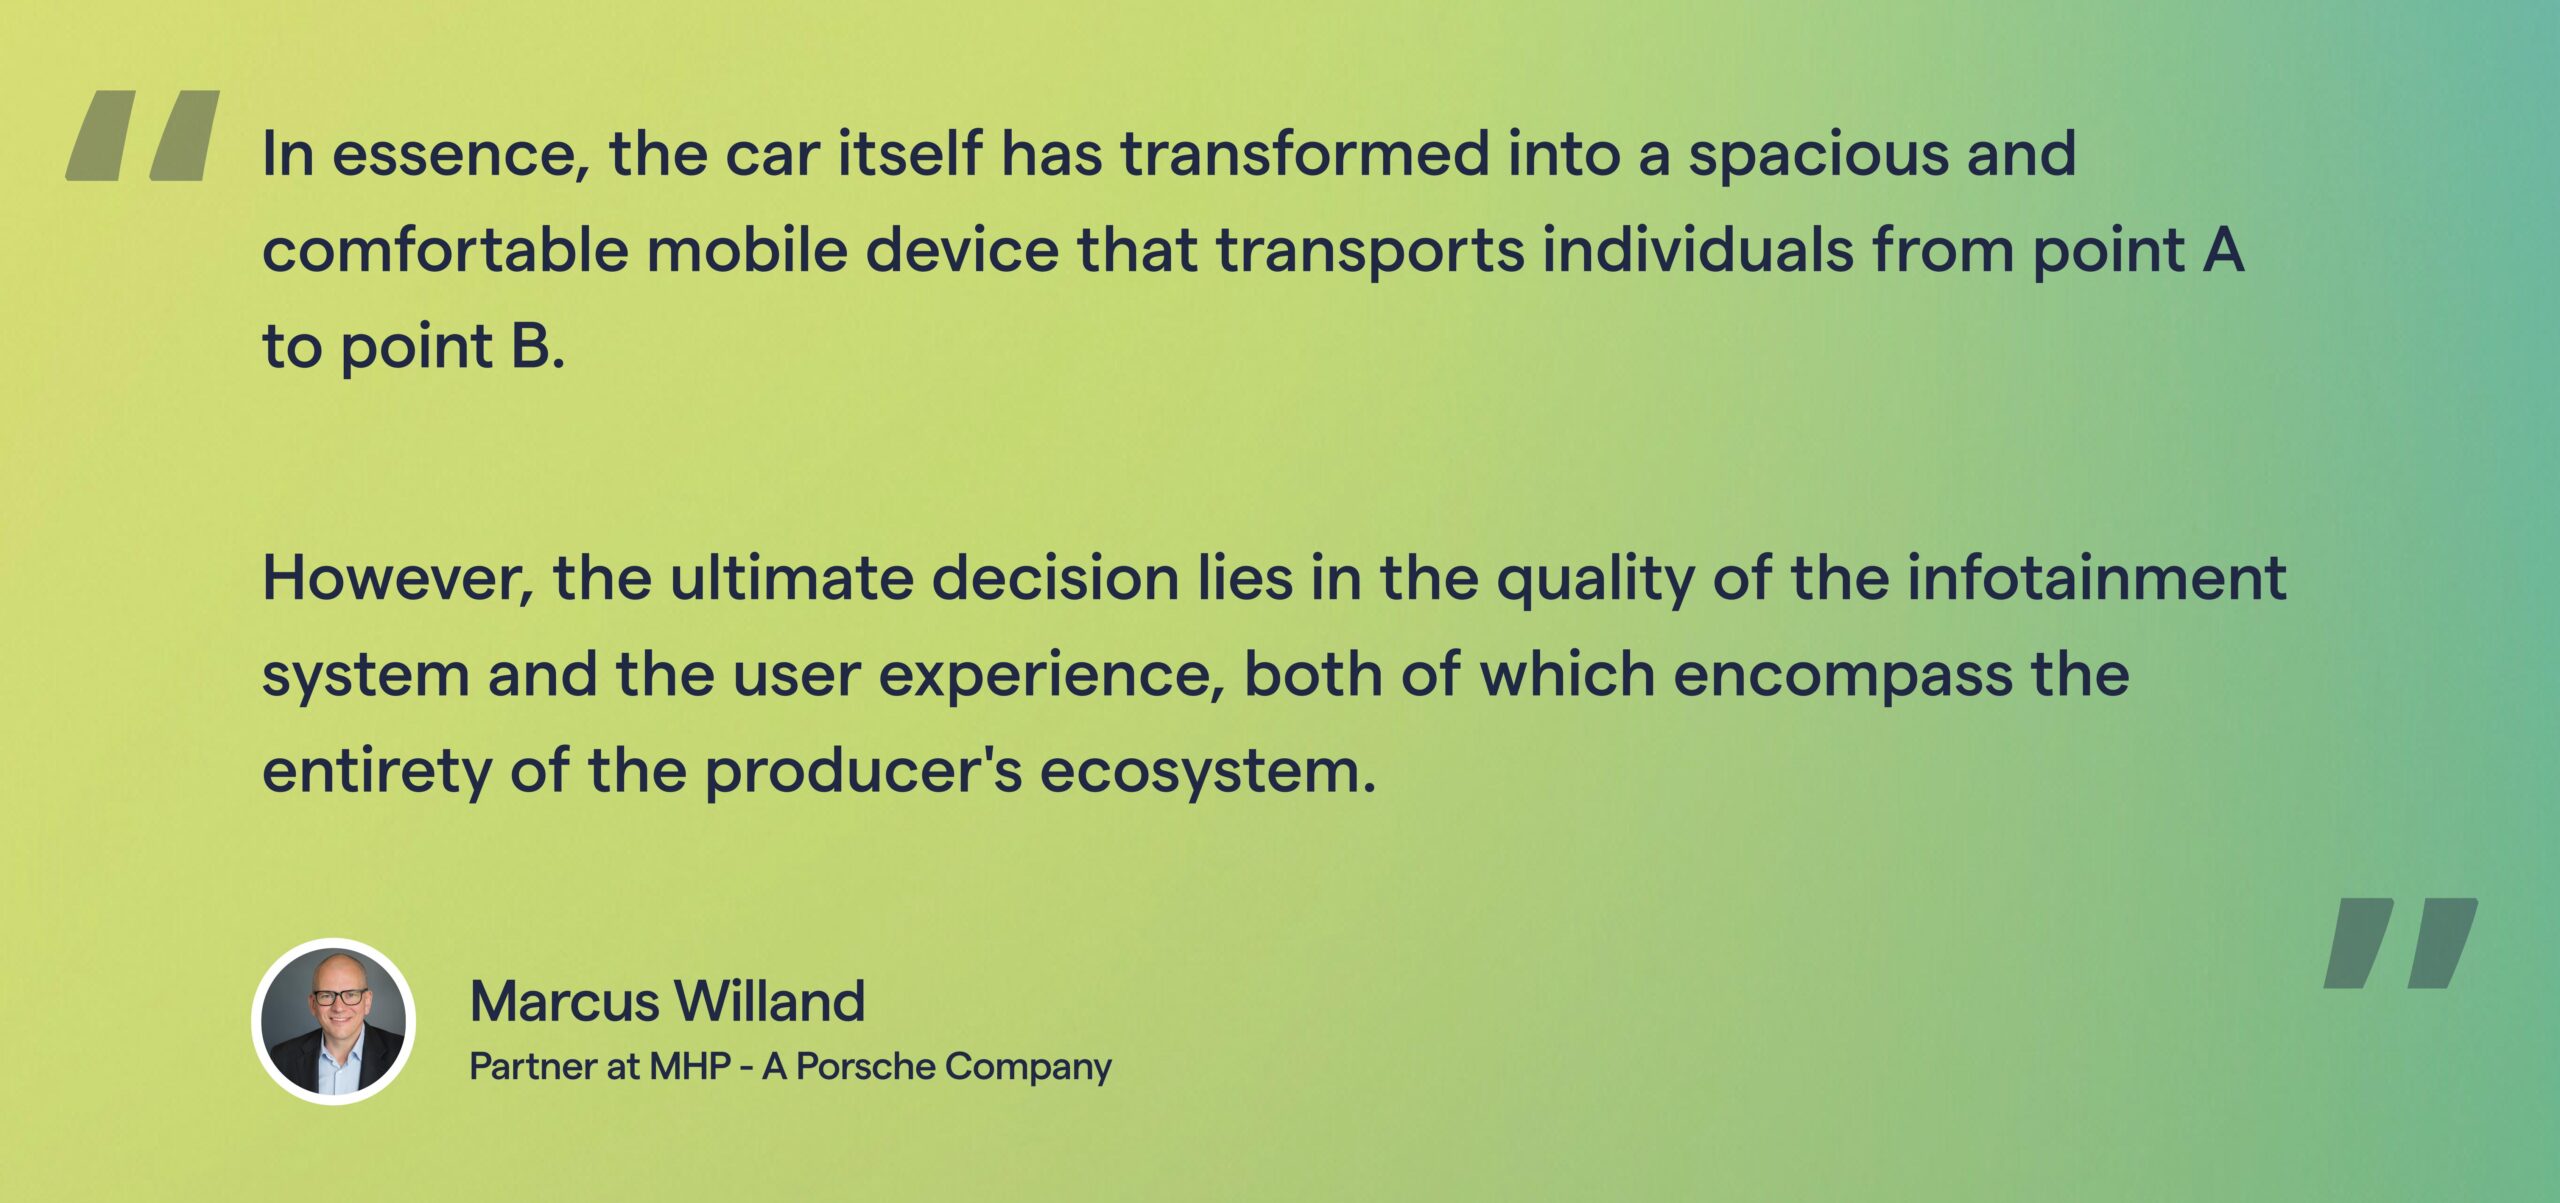 Marcus Willand about advancements in the automotive industry